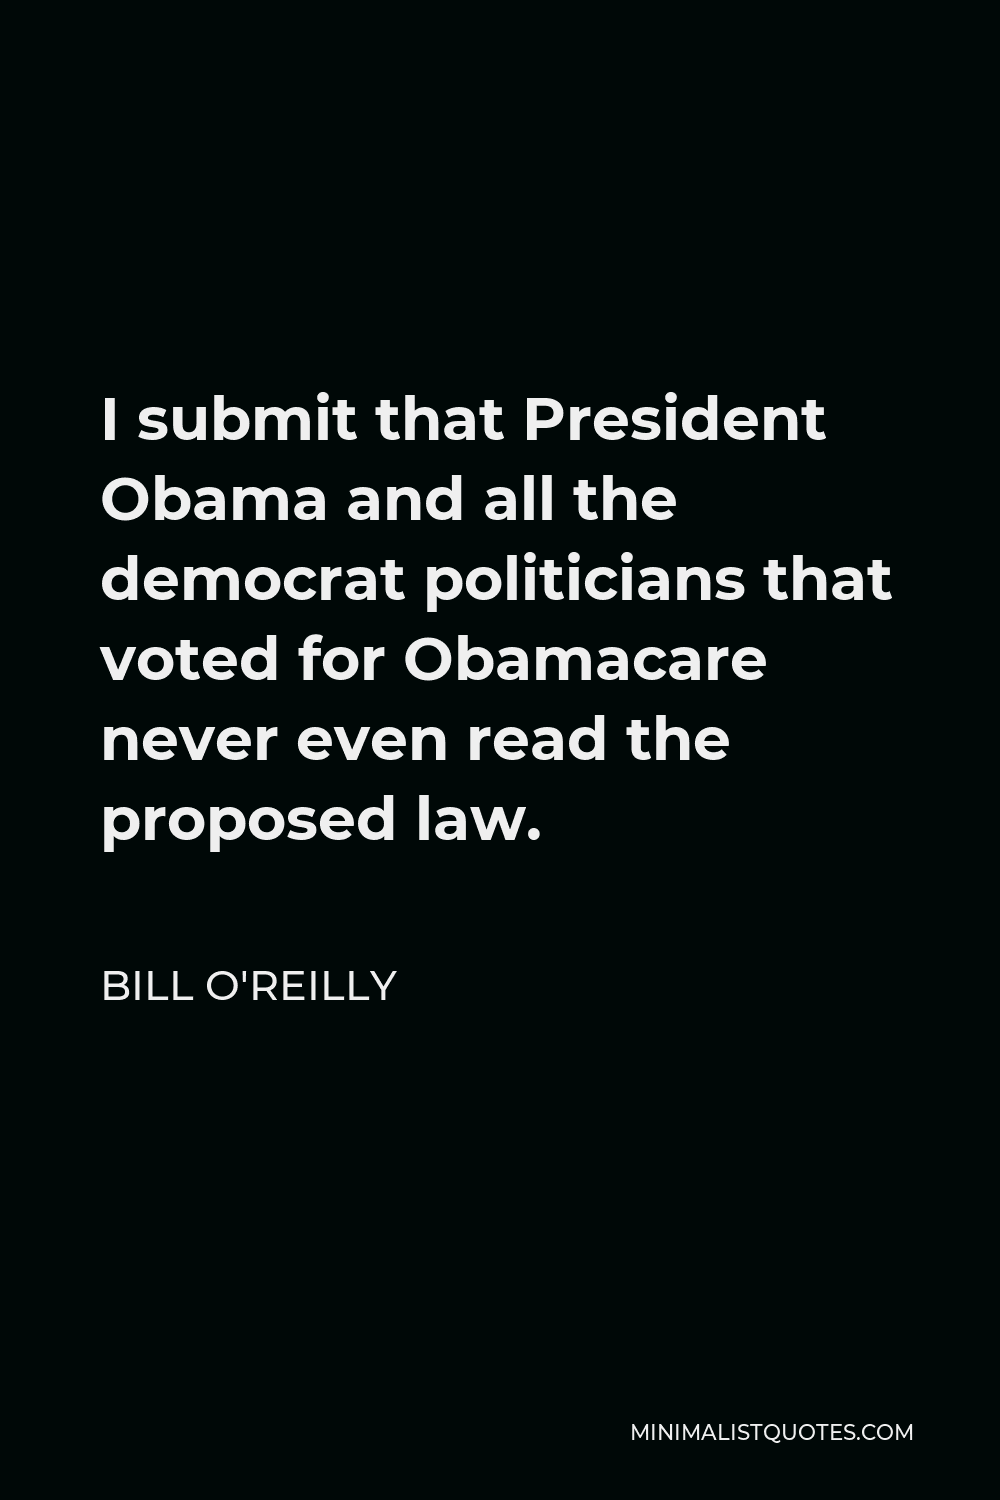 Bill O'Reilly Quote - I submit that President Obama and all the democrat politicians that voted for Obamacare never even read the proposed law.